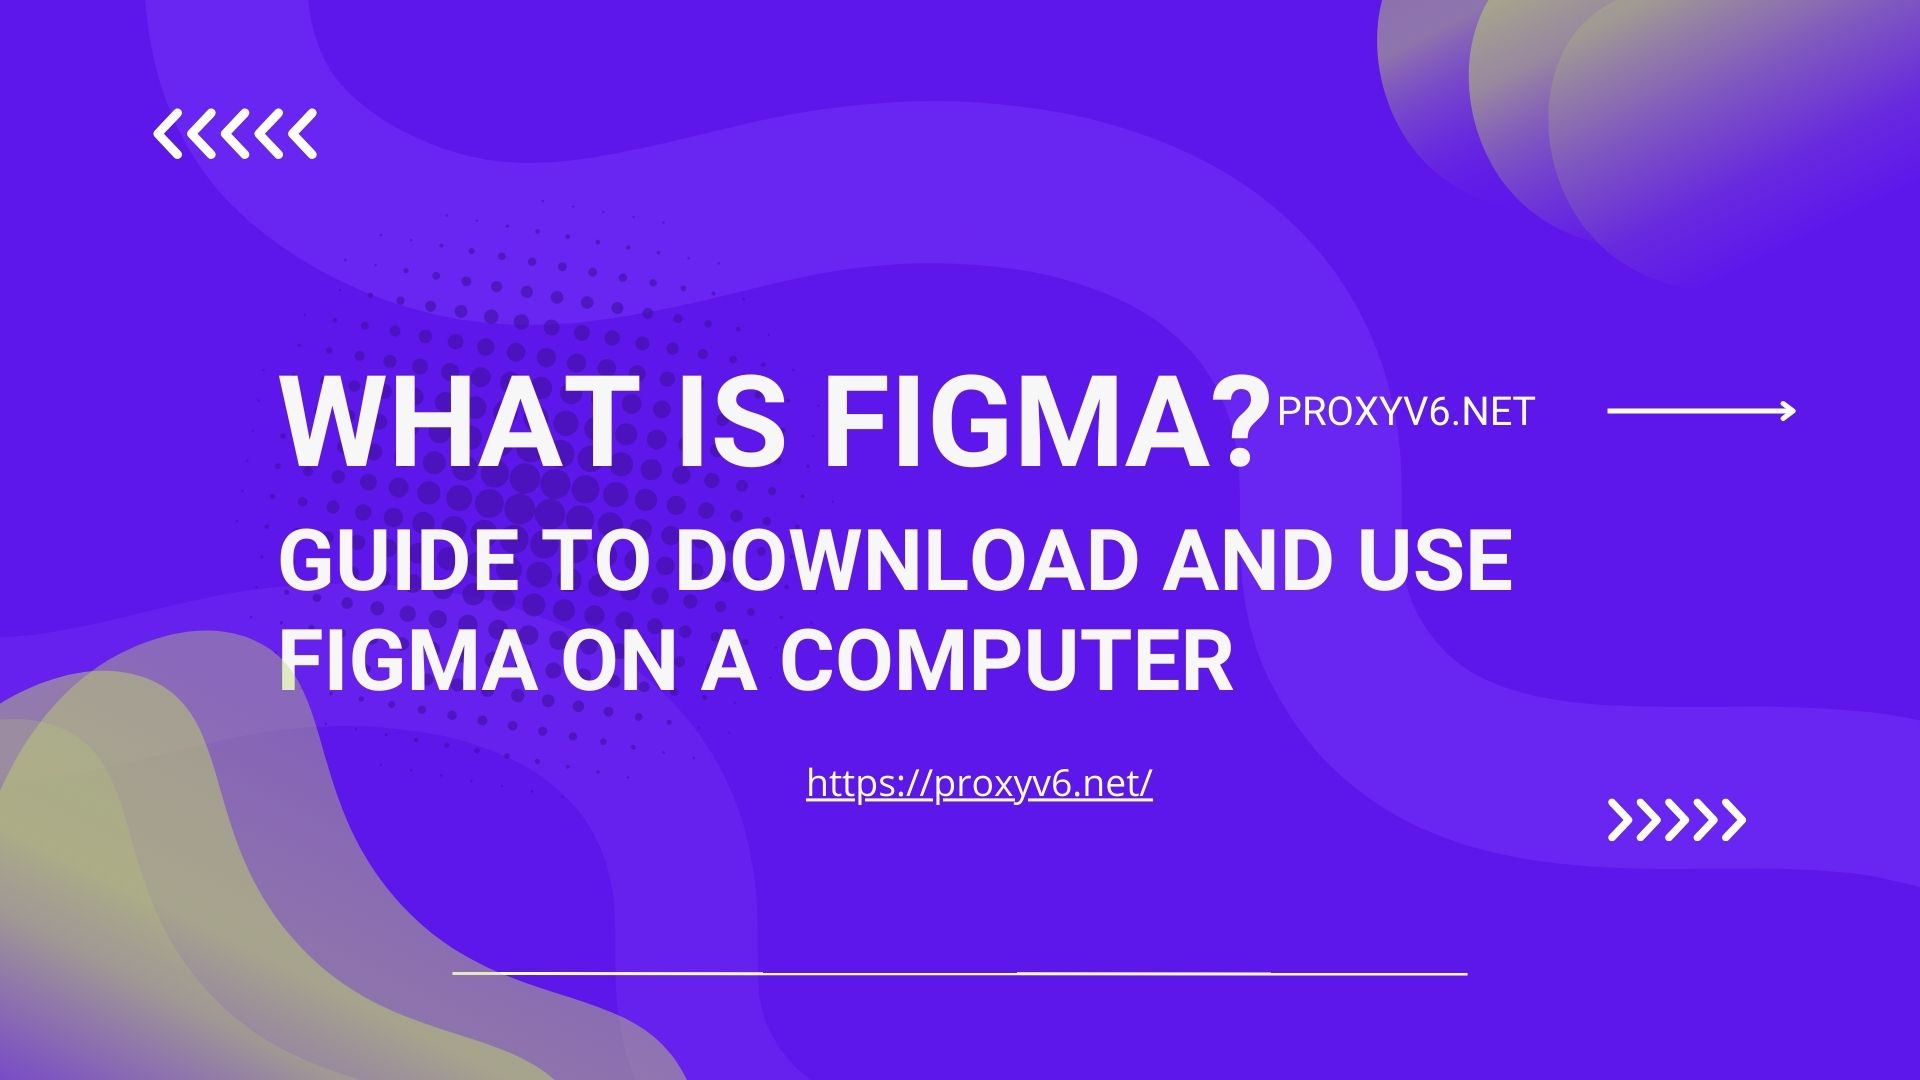 What is Figma? Guide to download and use Figma on a computer